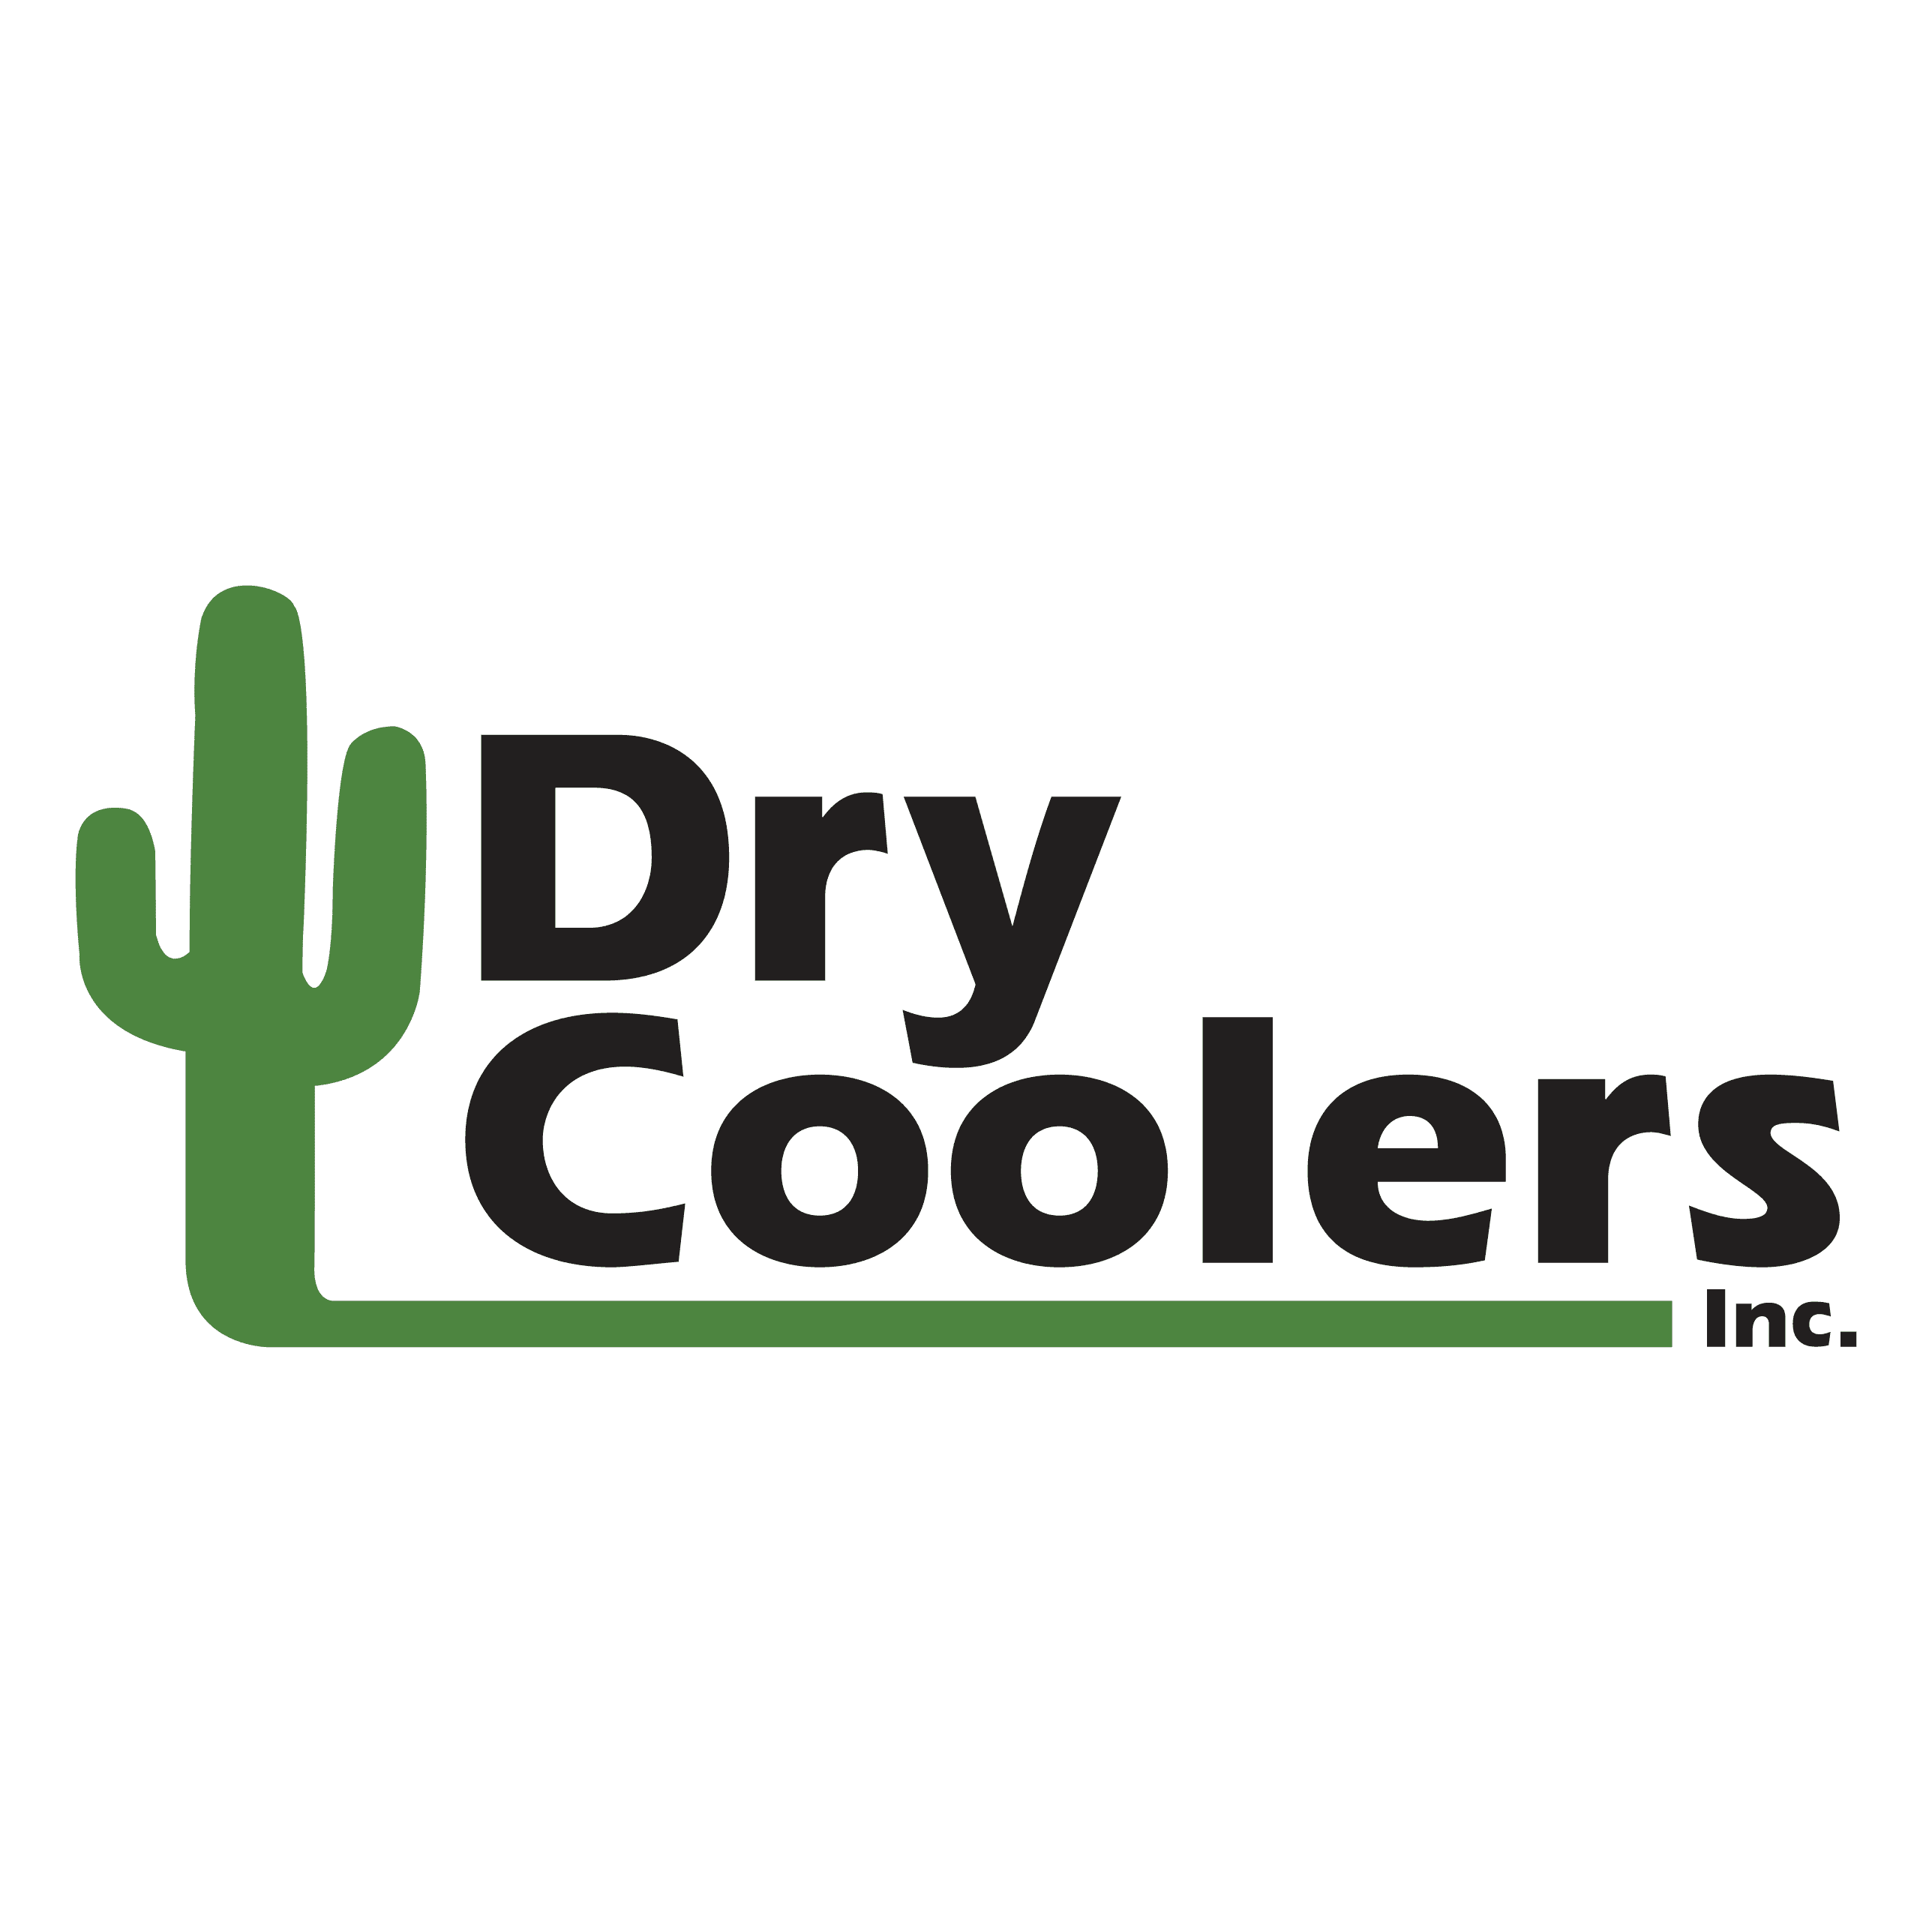 Product Products - Dry Coolers image